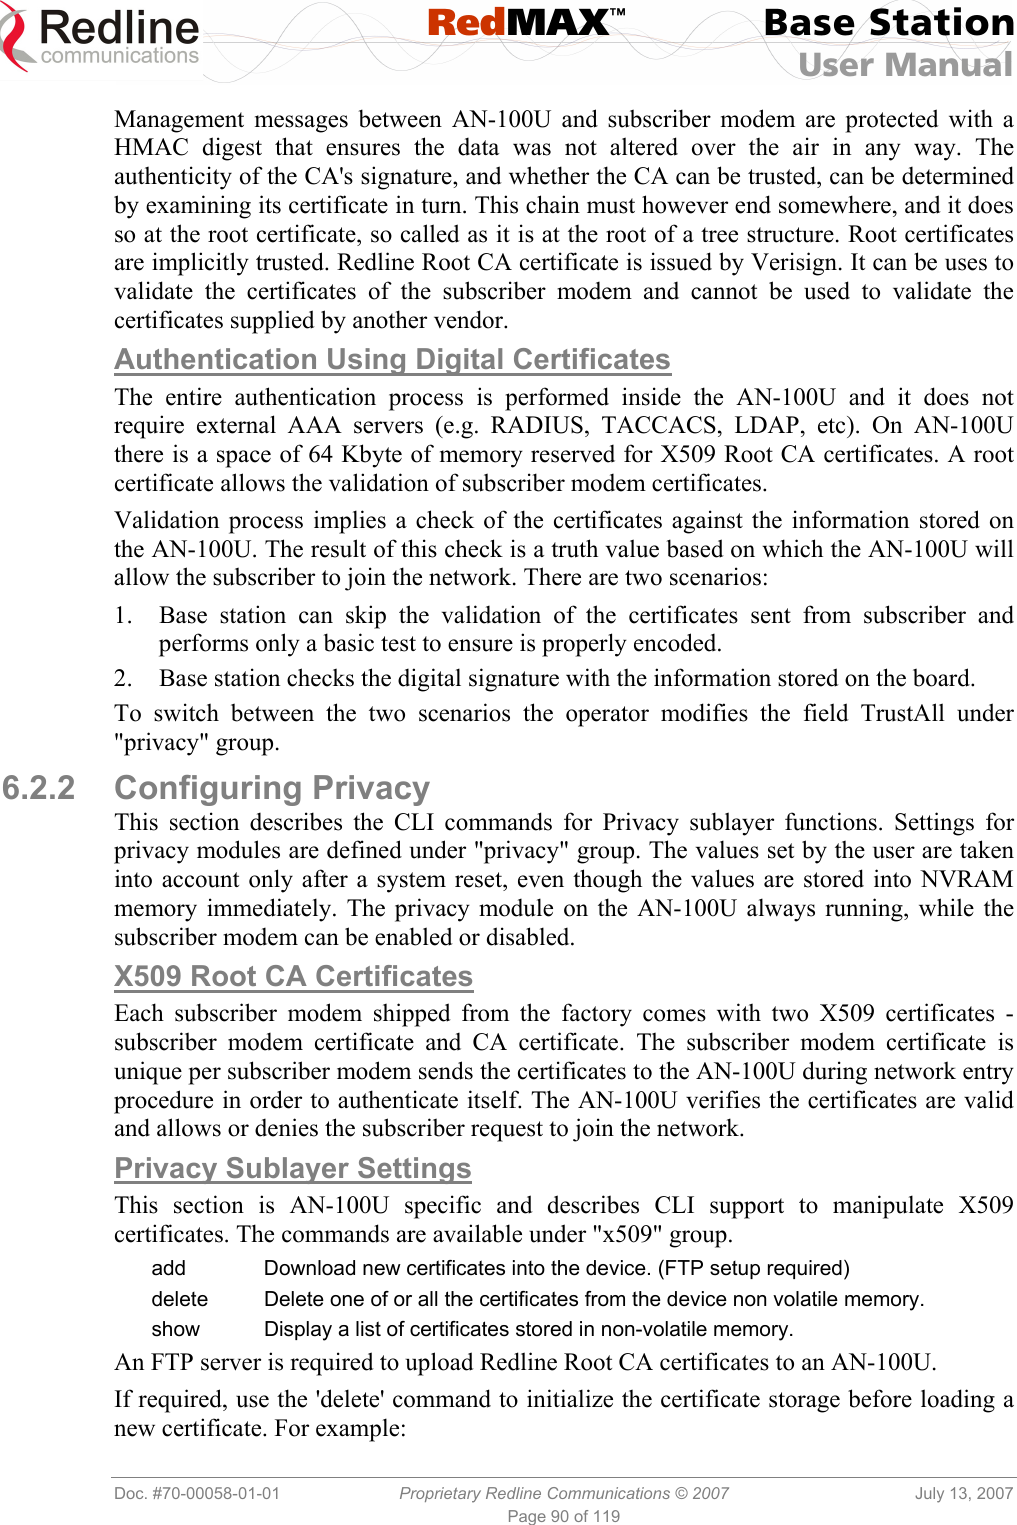  RedMAX™ Base Station User Manual   Doc. #70-00058-01-01  Proprietary Redline Communications © 2007  July 13, 2007 Page 90 of 119 Management messages between AN-100U and subscriber modem are protected with a HMAC digest that ensures the data was not altered over the air in any way. The authenticity of the CA&apos;s signature, and whether the CA can be trusted, can be determined by examining its certificate in turn. This chain must however end somewhere, and it does so at the root certificate, so called as it is at the root of a tree structure. Root certificates are implicitly trusted. Redline Root CA certificate is issued by Verisign. It can be uses to validate the certificates of the subscriber modem and cannot be used to validate the certificates supplied by another vendor. Authentication Using Digital Certificates The entire authentication process is performed inside the AN-100U and it does not require external AAA servers (e.g. RADIUS, TACCACS, LDAP, etc). On AN-100U there is a space of 64 Kbyte of memory reserved for X509 Root CA certificates. A root certificate allows the validation of subscriber modem certificates.  Validation process implies a check of the certificates against the information stored on the AN-100U. The result of this check is a truth value based on which the AN-100U will allow the subscriber to join the network. There are two scenarios: 1.  Base station can skip the validation of the certificates sent from subscriber and performs only a basic test to ensure is properly encoded. 2.  Base station checks the digital signature with the information stored on the board. To switch between the two scenarios the operator modifies the field TrustAll under &quot;privacy&quot; group. 6.2.2 Configuring Privacy This section describes the CLI commands for Privacy sublayer functions. Settings for privacy modules are defined under &quot;privacy&quot; group. The values set by the user are taken into account only after a system reset, even though the values are stored into NVRAM memory immediately. The privacy module on the AN-100U always running, while the subscriber modem can be enabled or disabled. X509 Root CA Certificates Each subscriber modem shipped from the factory comes with two X509 certificates - subscriber modem certificate and CA certificate. The subscriber modem certificate is unique per subscriber modem sends the certificates to the AN-100U during network entry procedure in order to authenticate itself. The AN-100U verifies the certificates are valid and allows or denies the subscriber request to join the network. Privacy Sublayer Settings This section is AN-100U specific and describes CLI support to manipulate X509 certificates. The commands are available under &quot;x509&quot; group.  add  Download new certificates into the device. (FTP setup required) delete  Delete one of or all the certificates from the device non volatile memory. show  Display a list of certificates stored in non-volatile memory. An FTP server is required to upload Redline Root CA certificates to an AN-100U. If required, use the &apos;delete&apos; command to initialize the certificate storage before loading a new certificate. For example: 